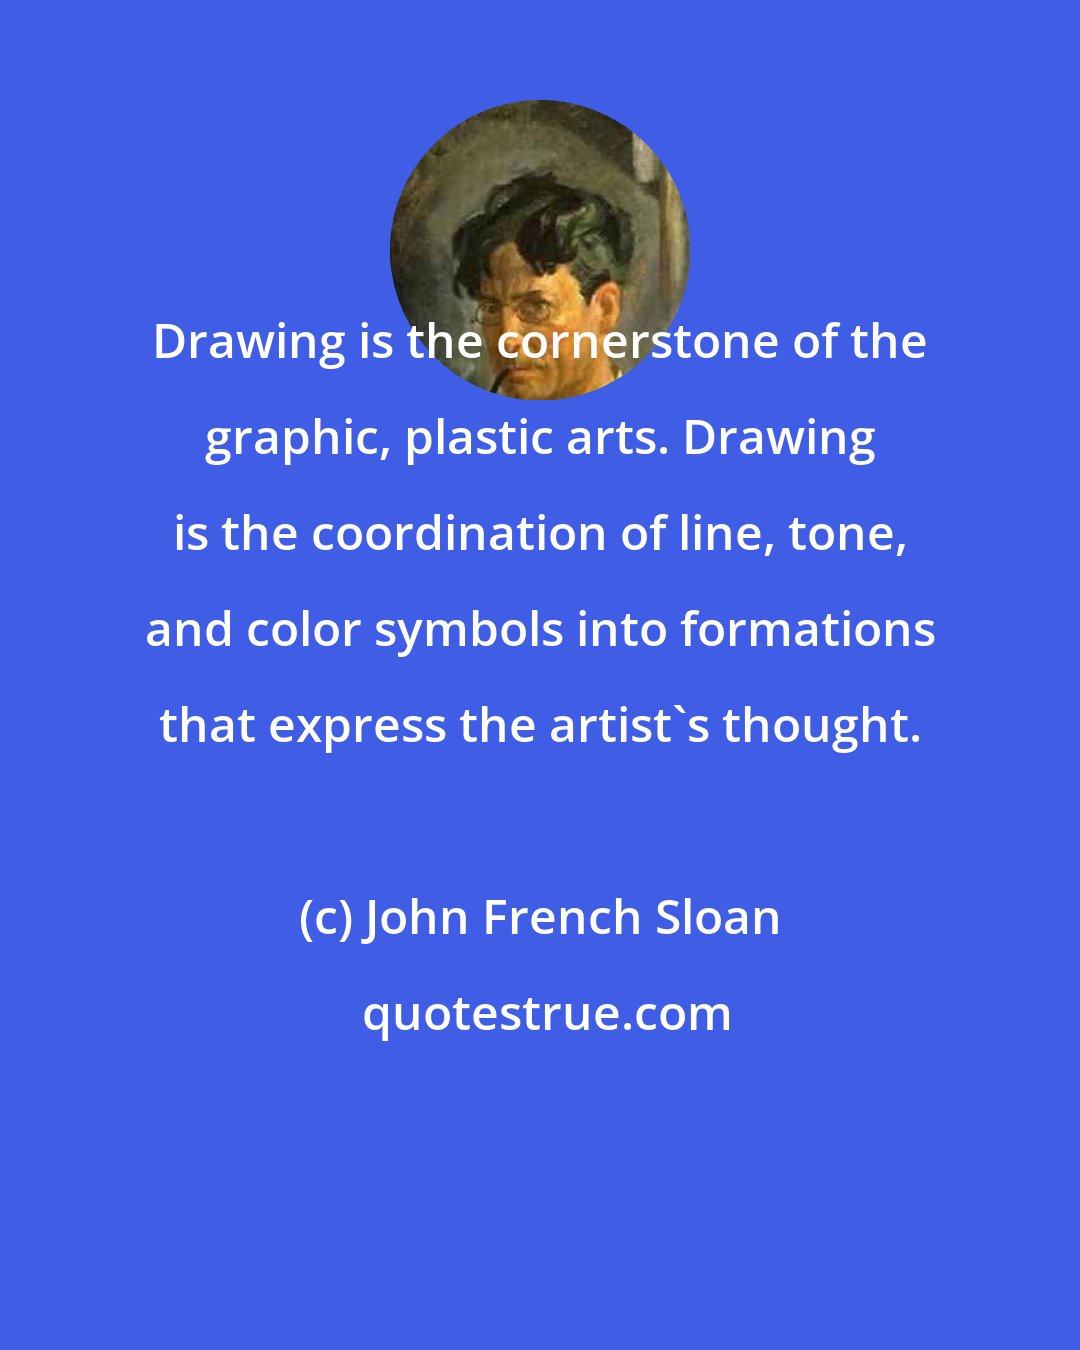 John French Sloan: Drawing is the cornerstone of the graphic, plastic arts. Drawing is the coordination of line, tone, and color symbols into formations that express the artist's thought.